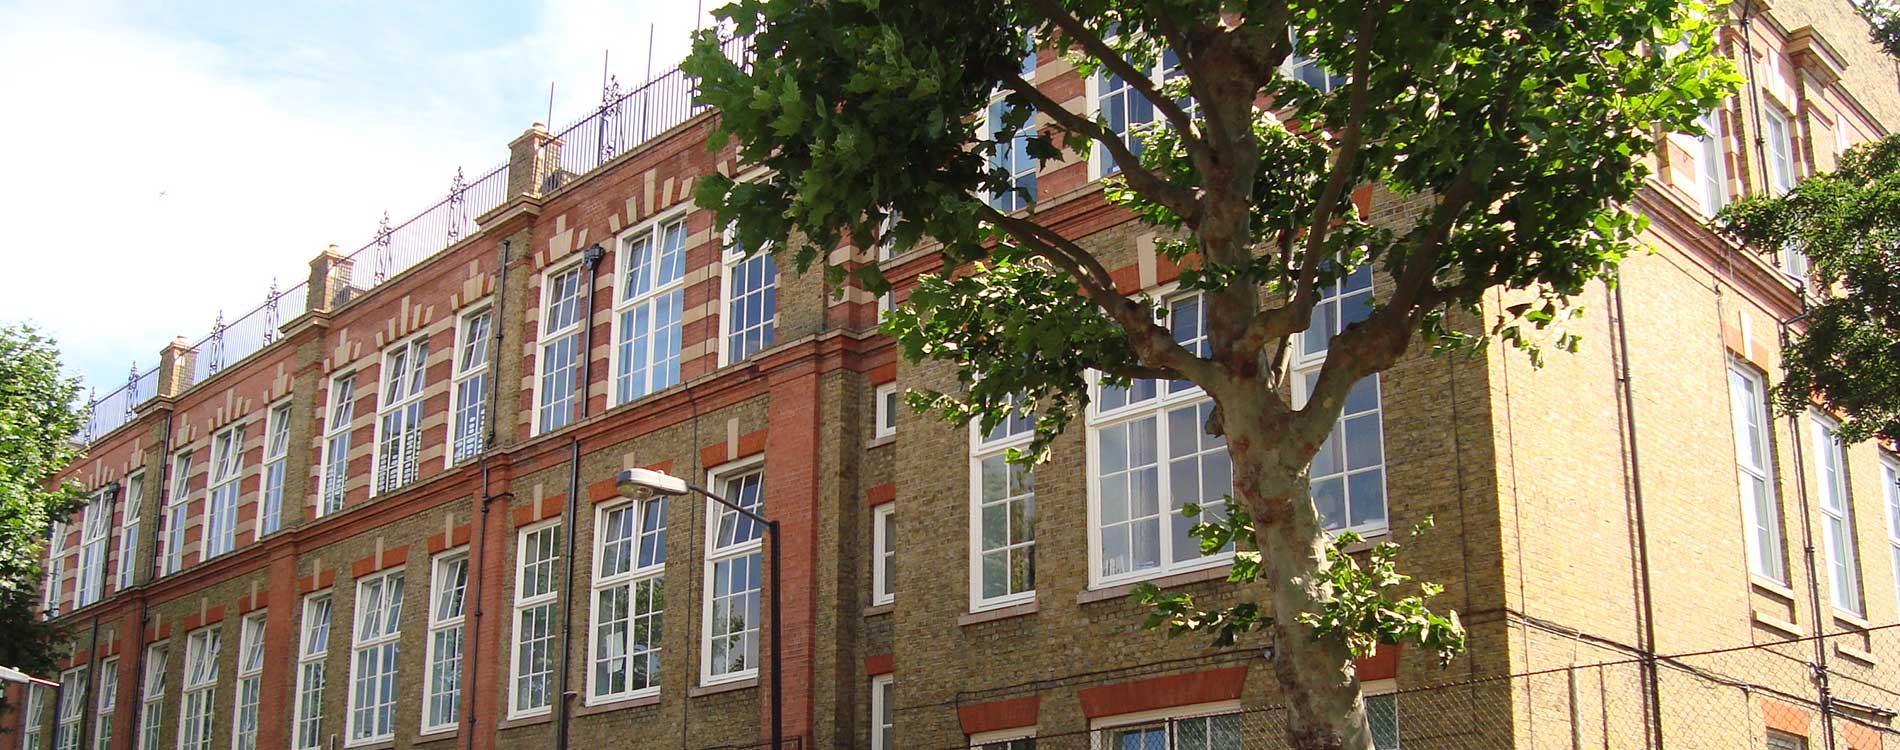 Historic london school with playground on the roof looks rejuvenated after the renovation works carried out by Axis